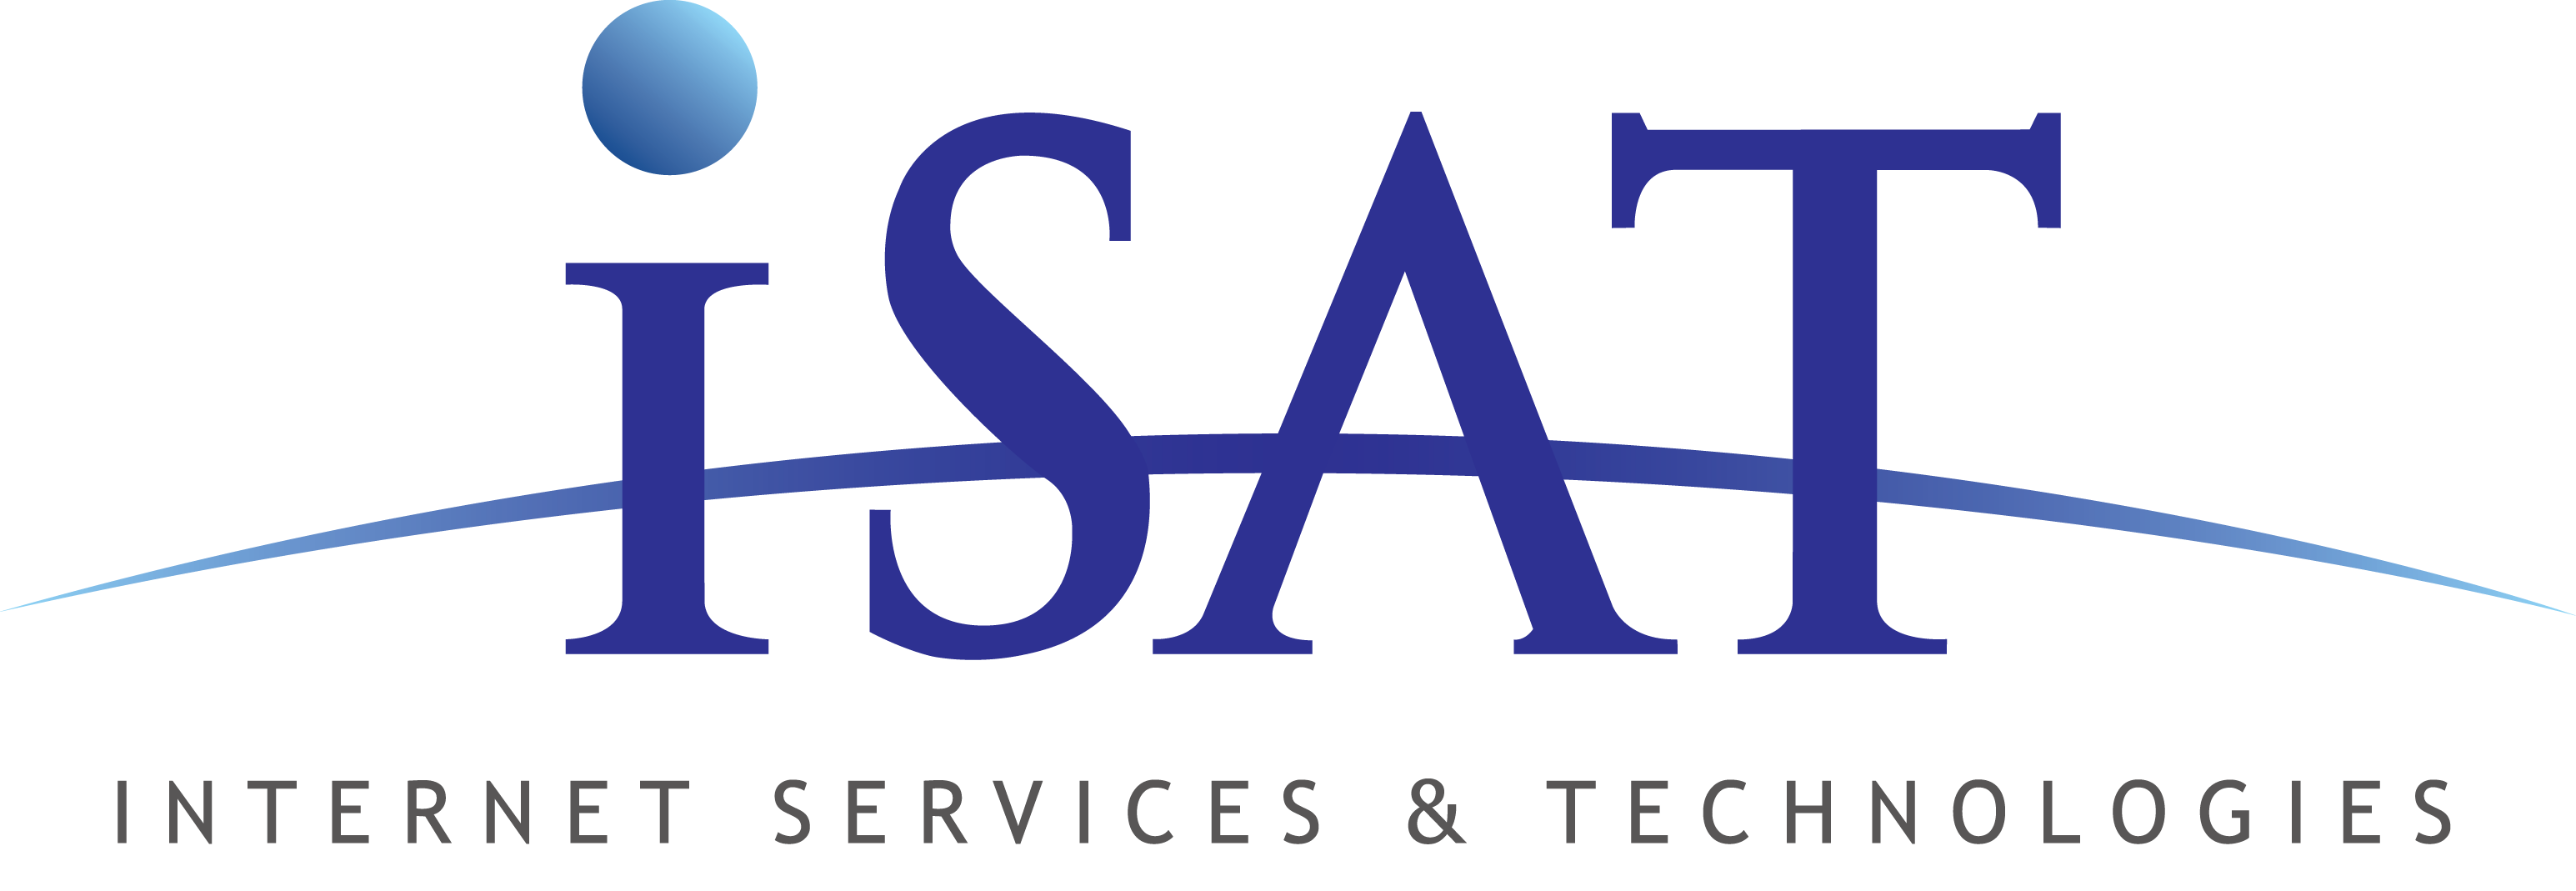 Internet Services and Technologies - iSAT